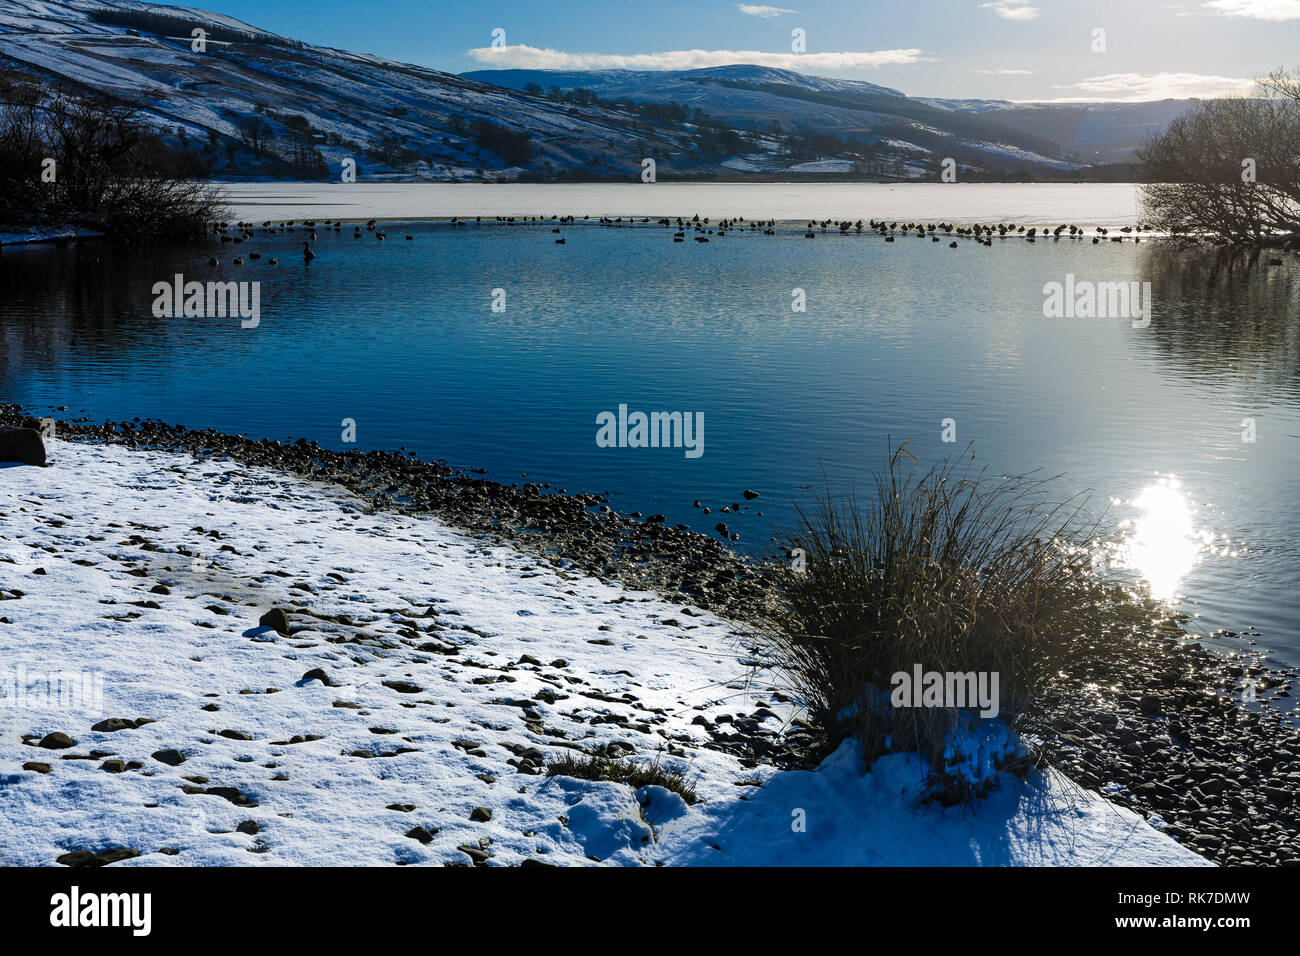 Semerwater in Winter. Semerwater  is the second largest natural lake in North Yorkshire, England, after Malham Tarn. It is half a mile long. Landscape Stock Photo